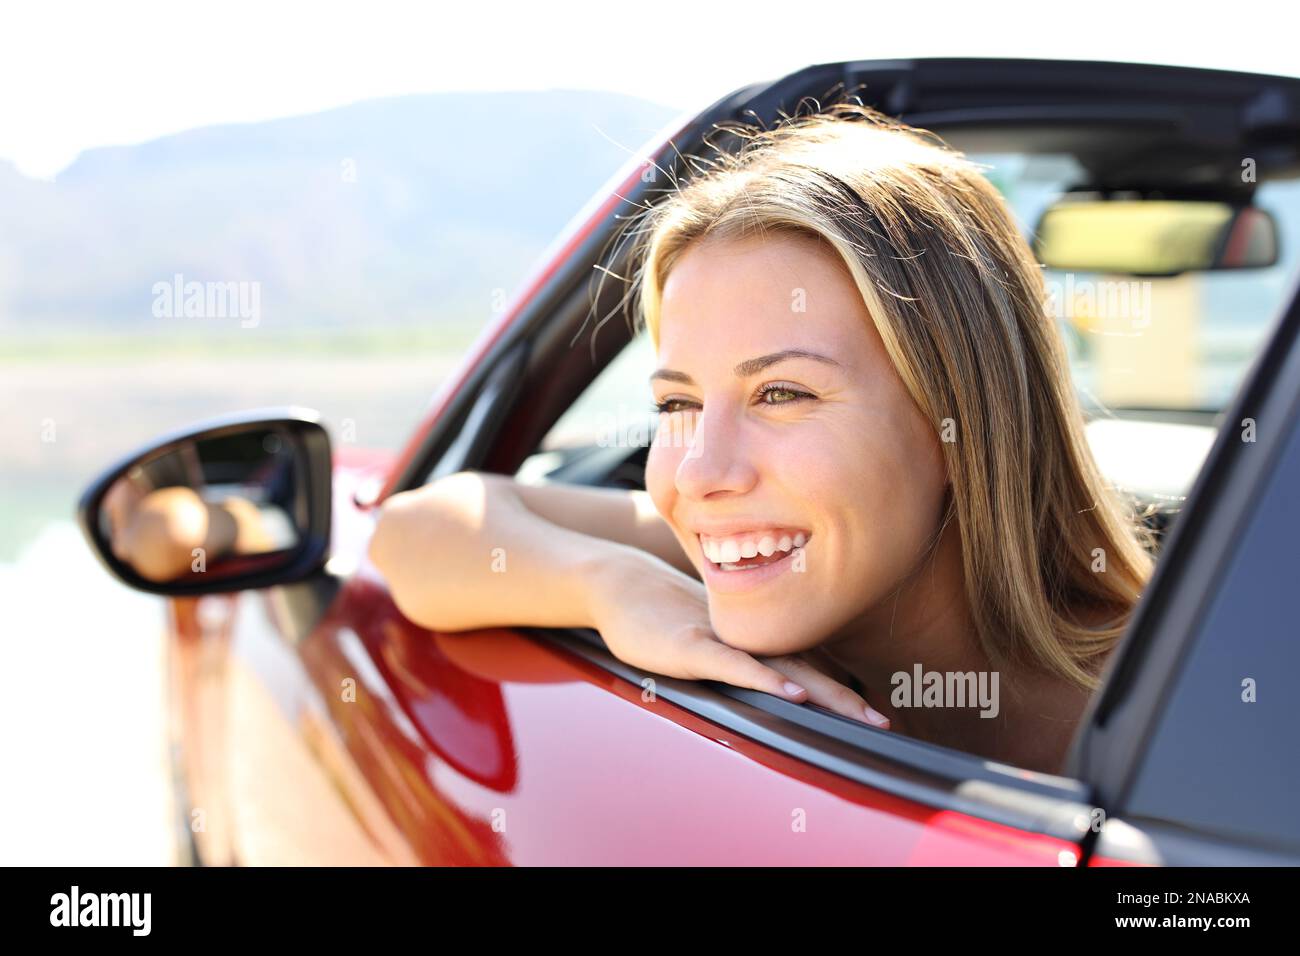 Happy car convertible driver laughing looking away Stock Photo